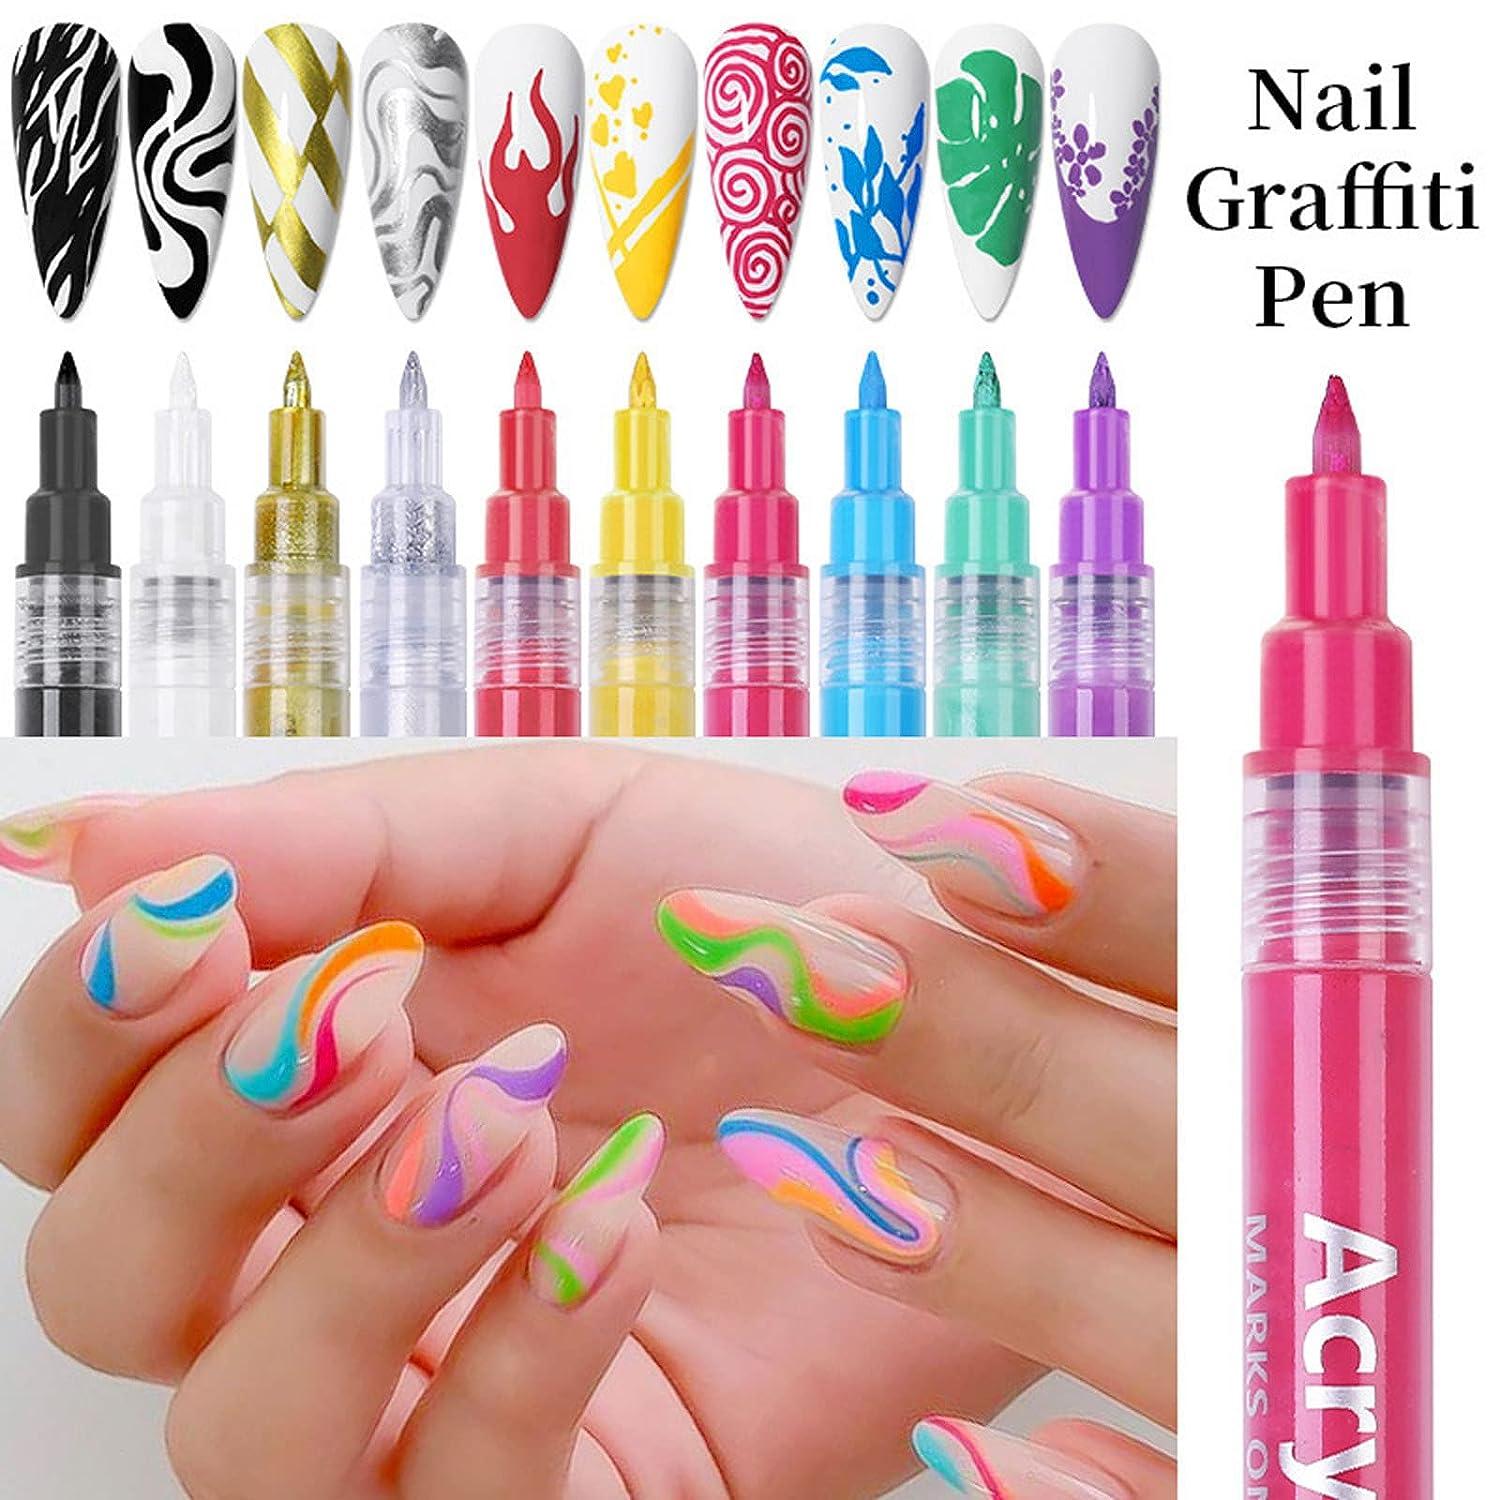 Buy Gel Nail Polish Pen 6pcs One Step Nail Gel Pen 3 in 1 Soak Off UV LED  Lamp Available Nail Art Tools Online at Low Prices in India - Amazon.in